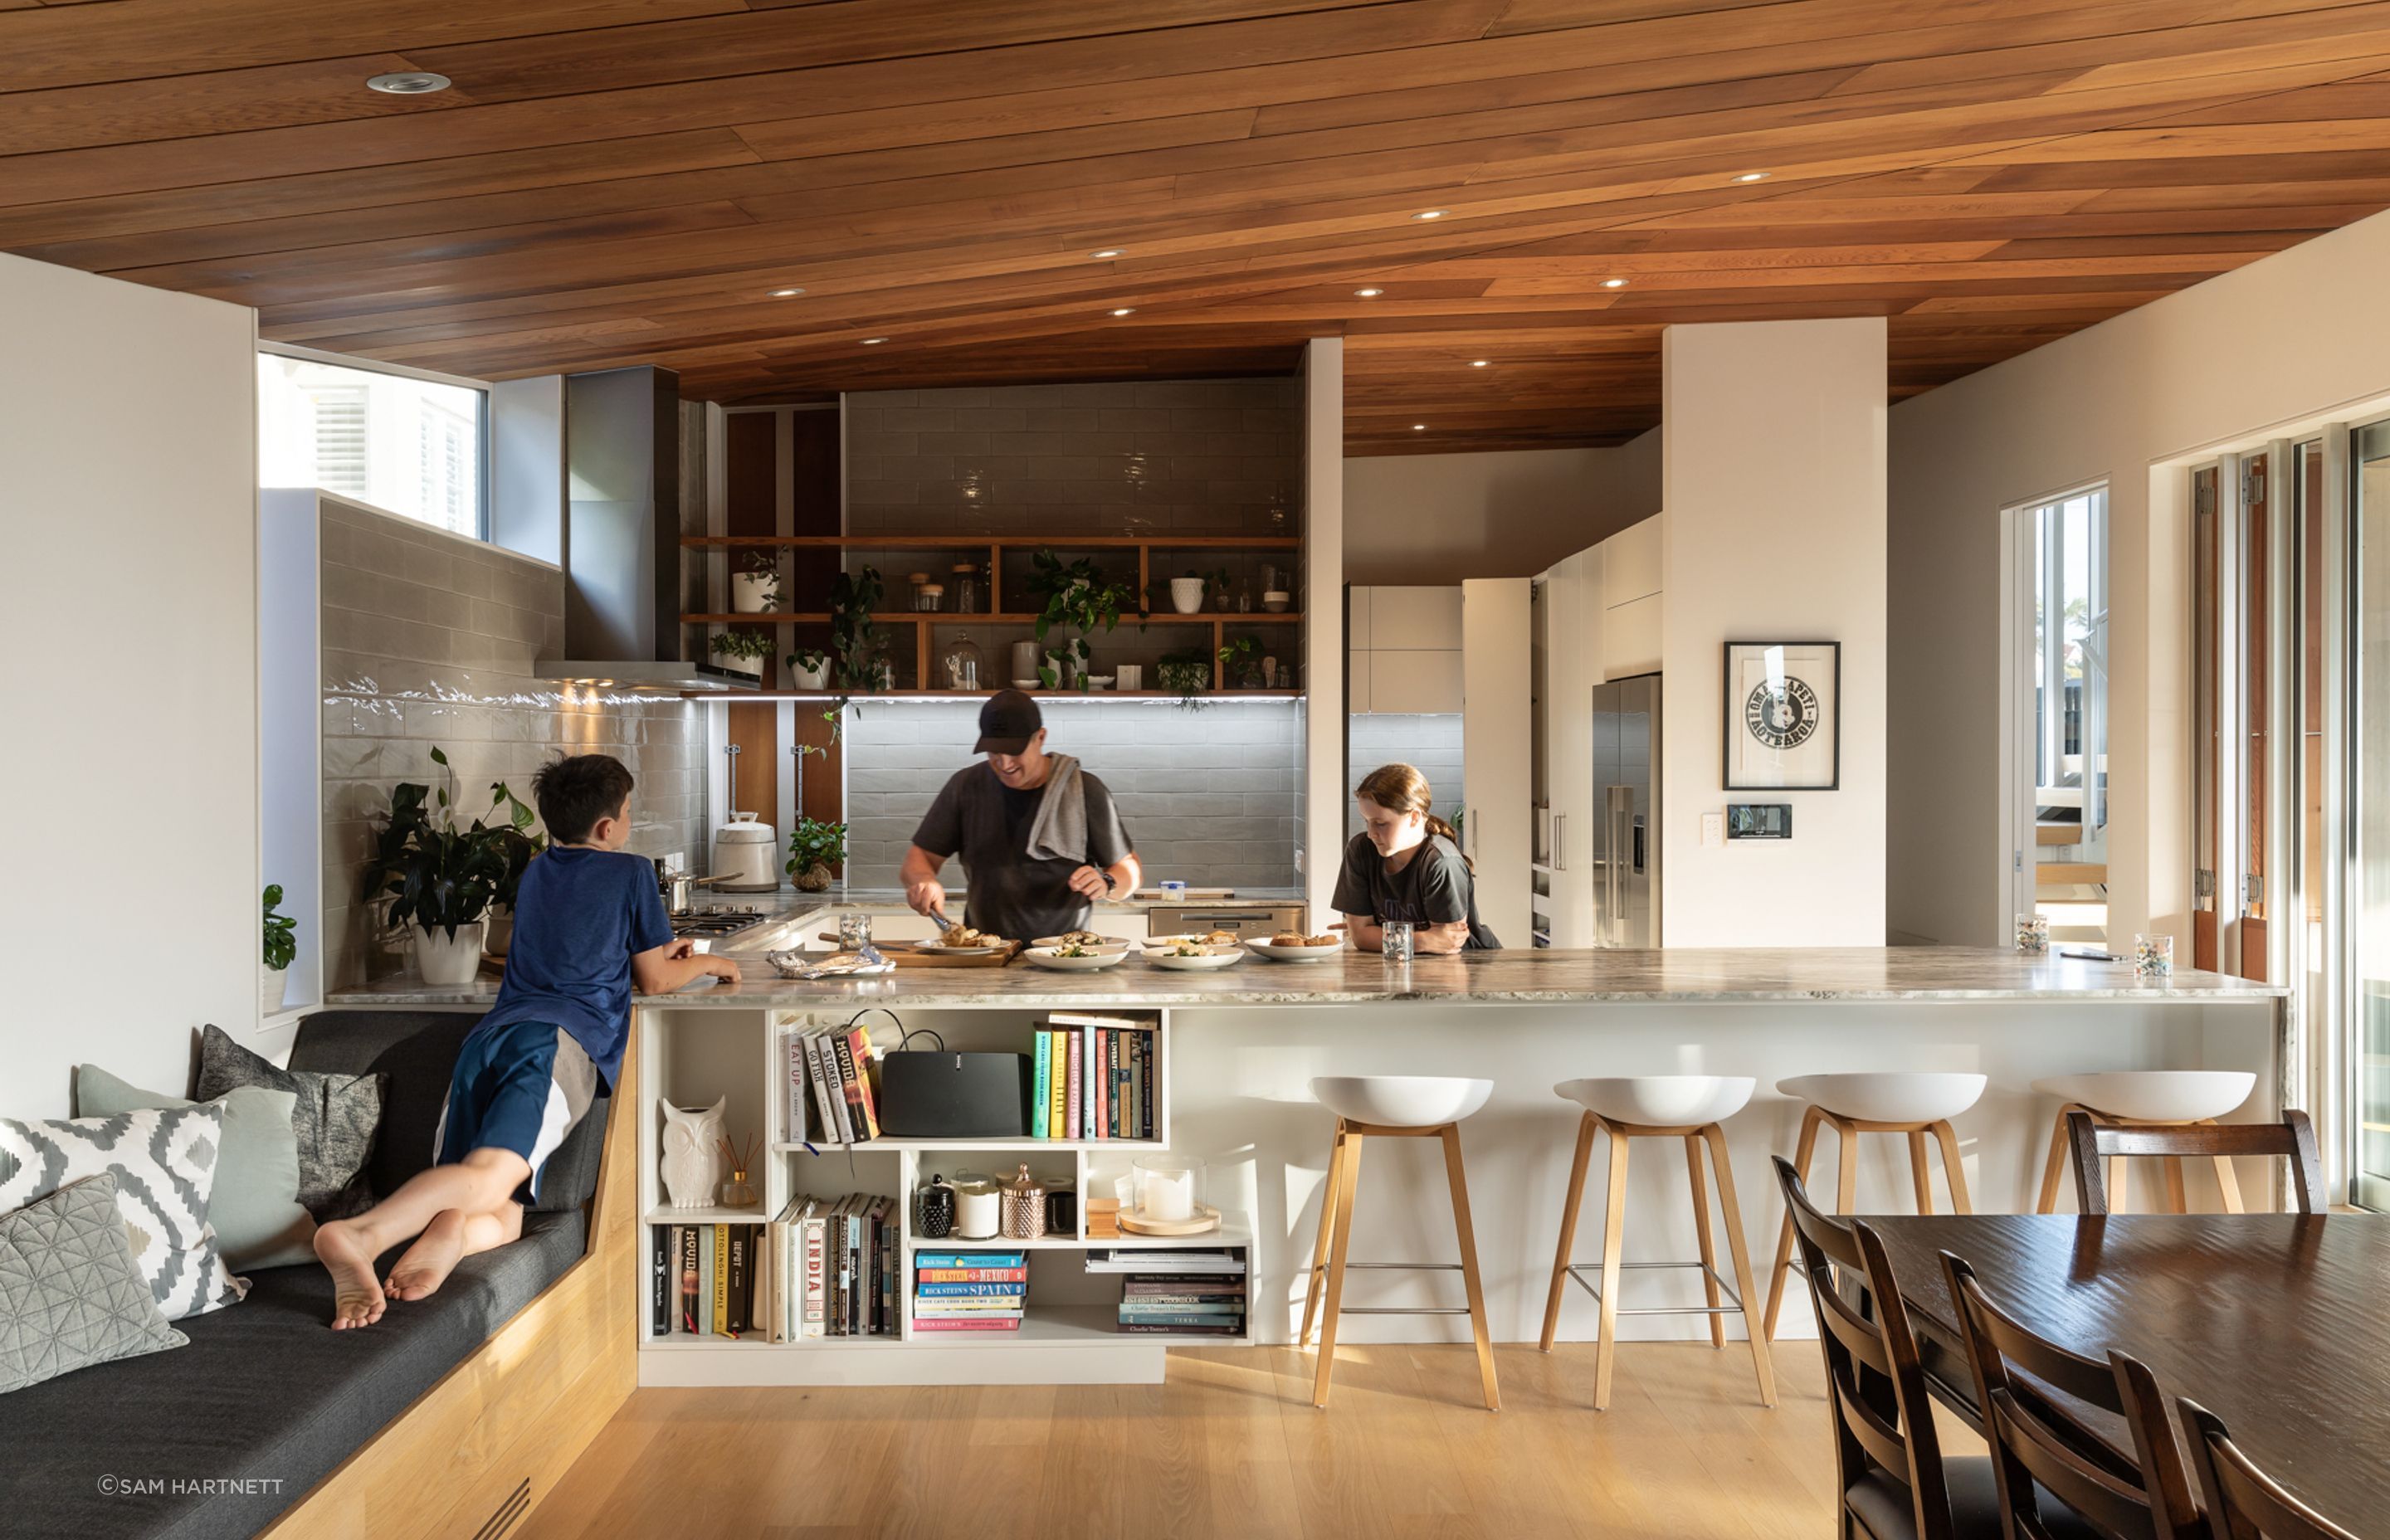 Part of the brief from the client was for there to be ample consideration given to spaces devoted to food preparation, including a large, "chef's" kitchen.